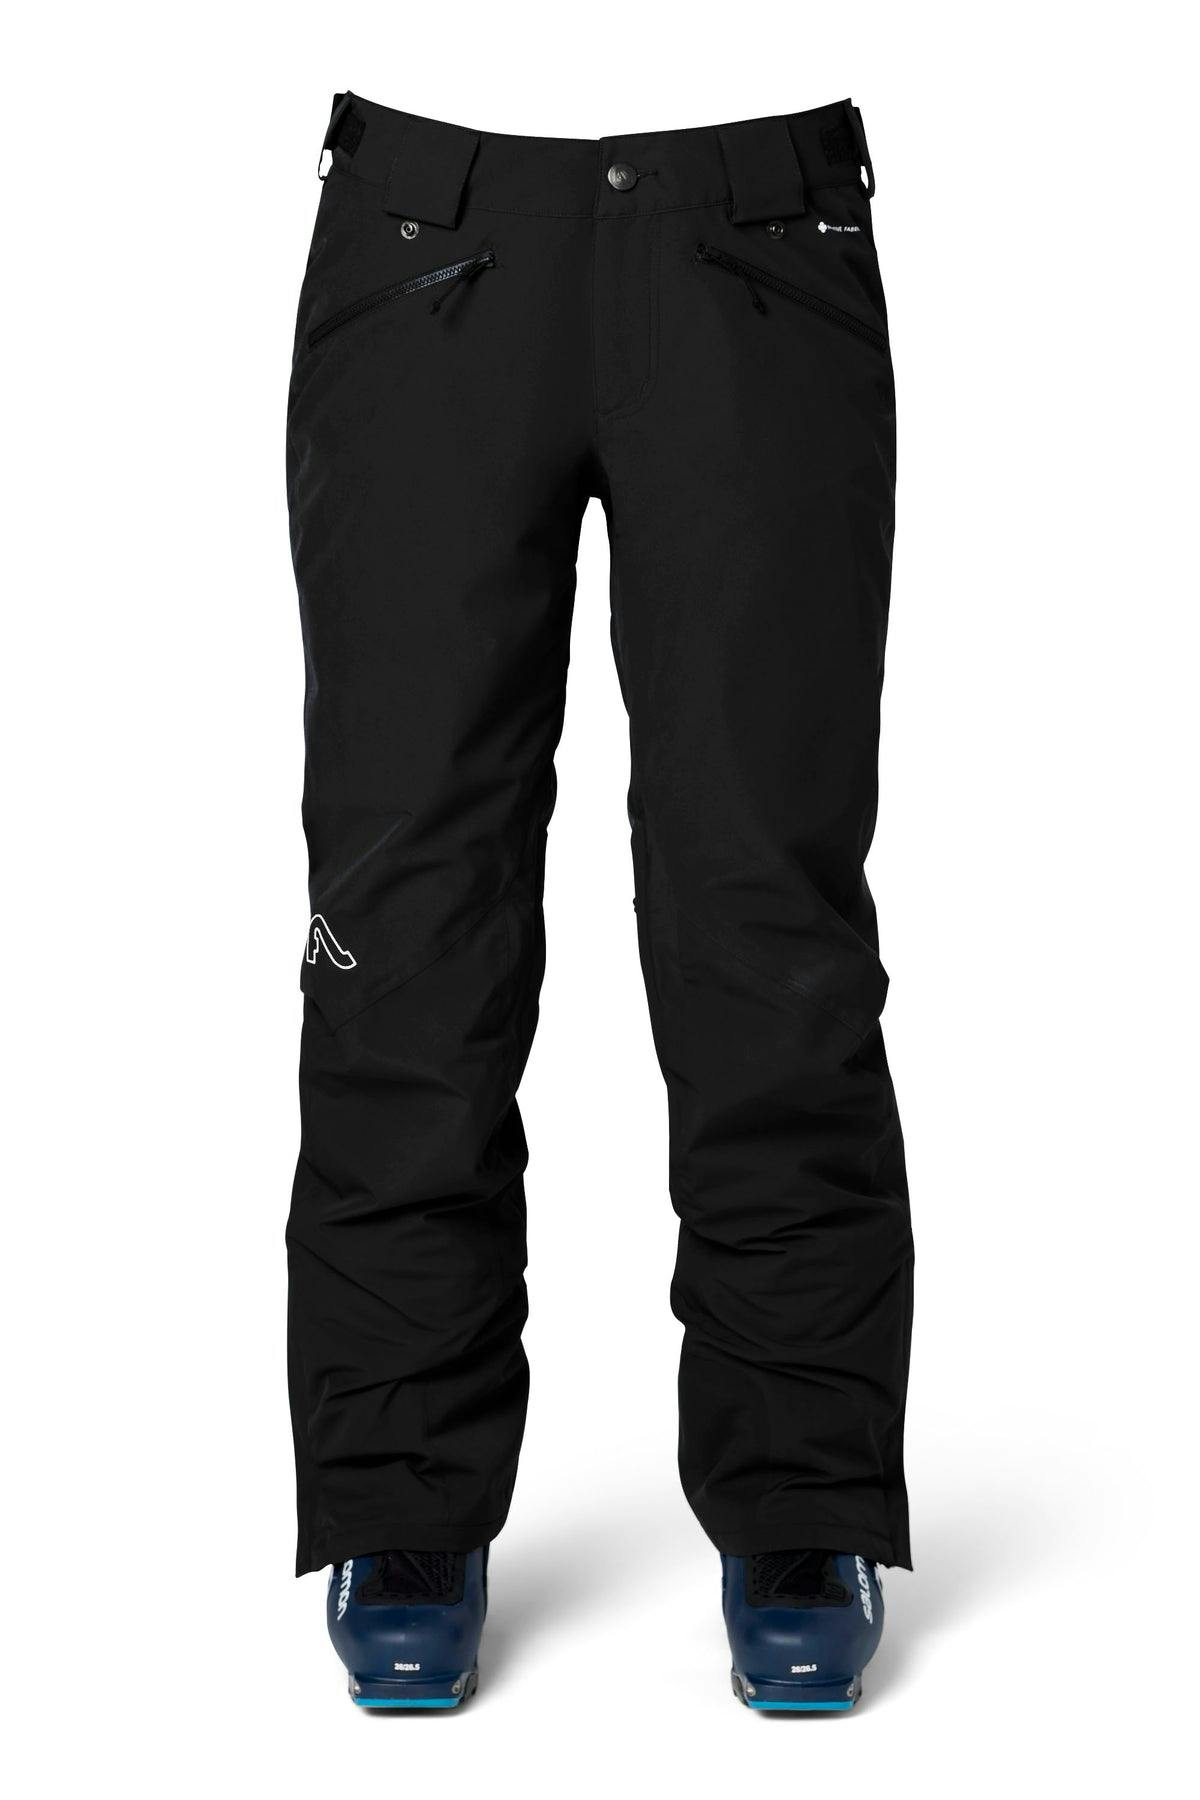 Flylow Women's Daisy 2L Insulated Pants